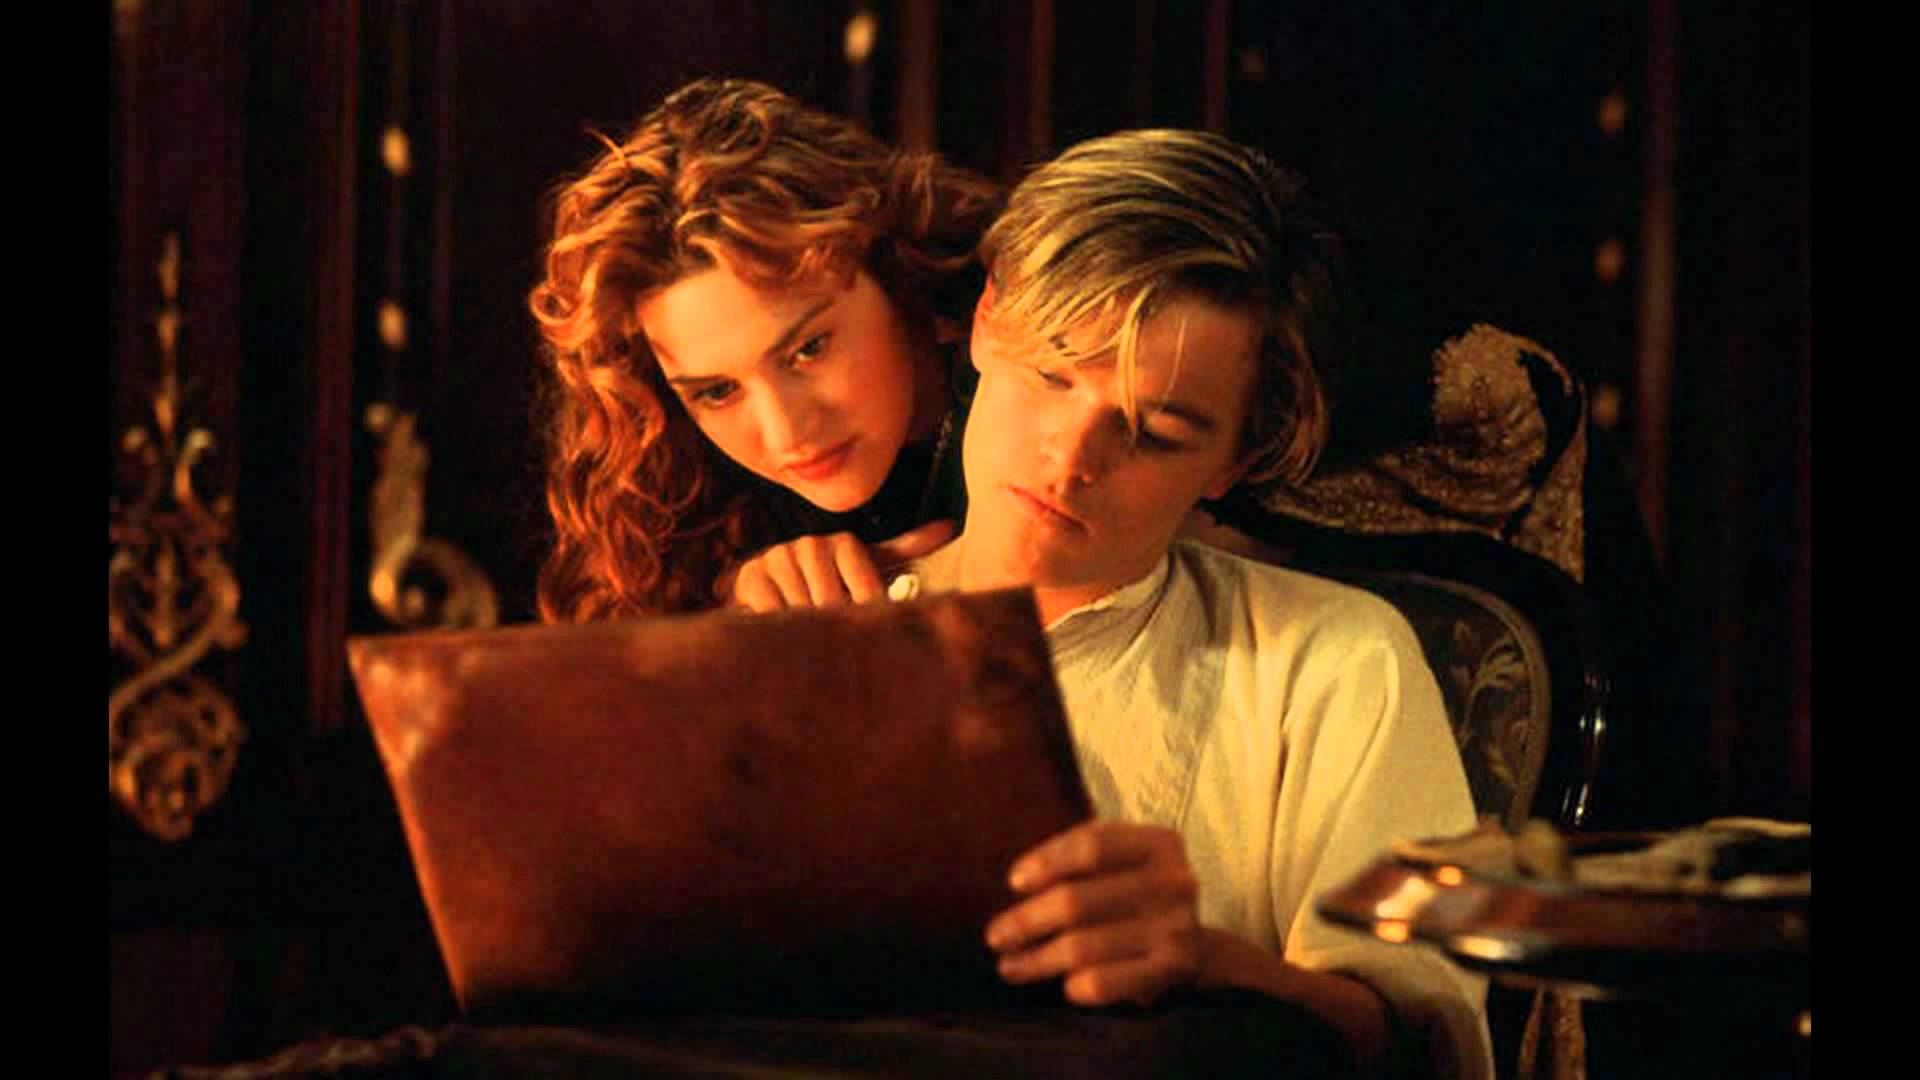 1920x1080 rose and titanic's real love story Forget that Jack didn't have to die, there's a bigger story to consider